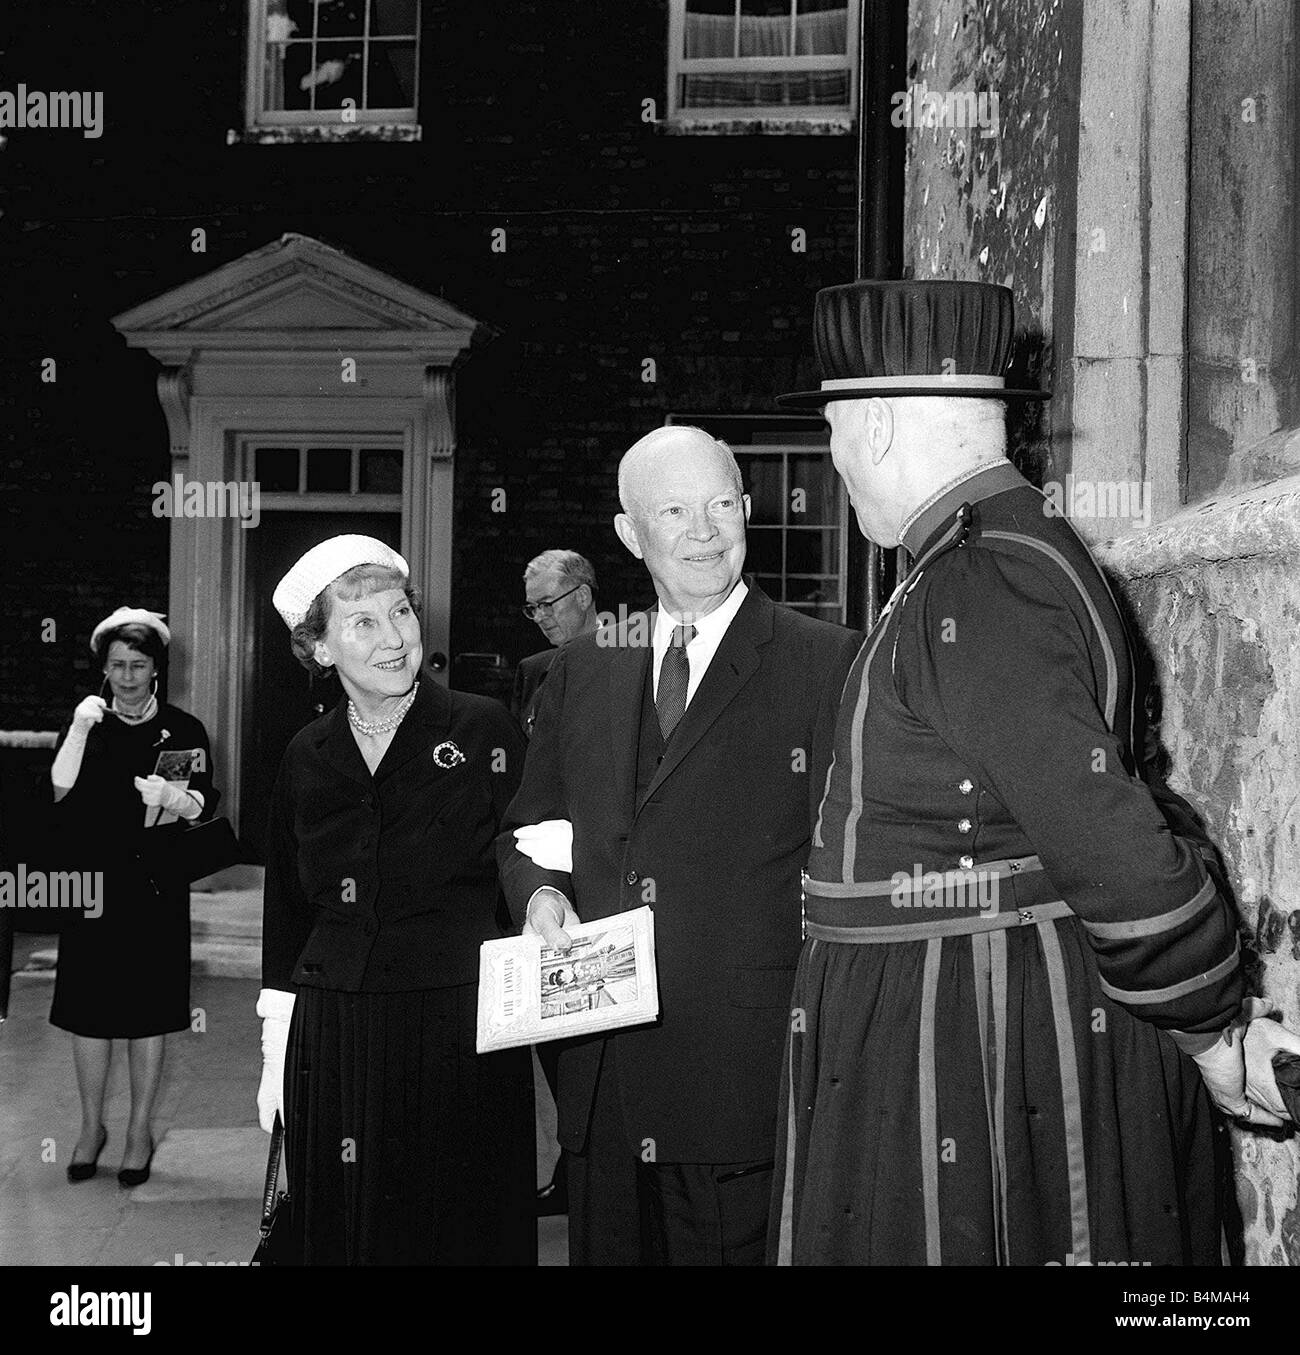 General Dwight Eisenhower US President with his wife Mamie Eisenhower at the Tower of London Stock Photo